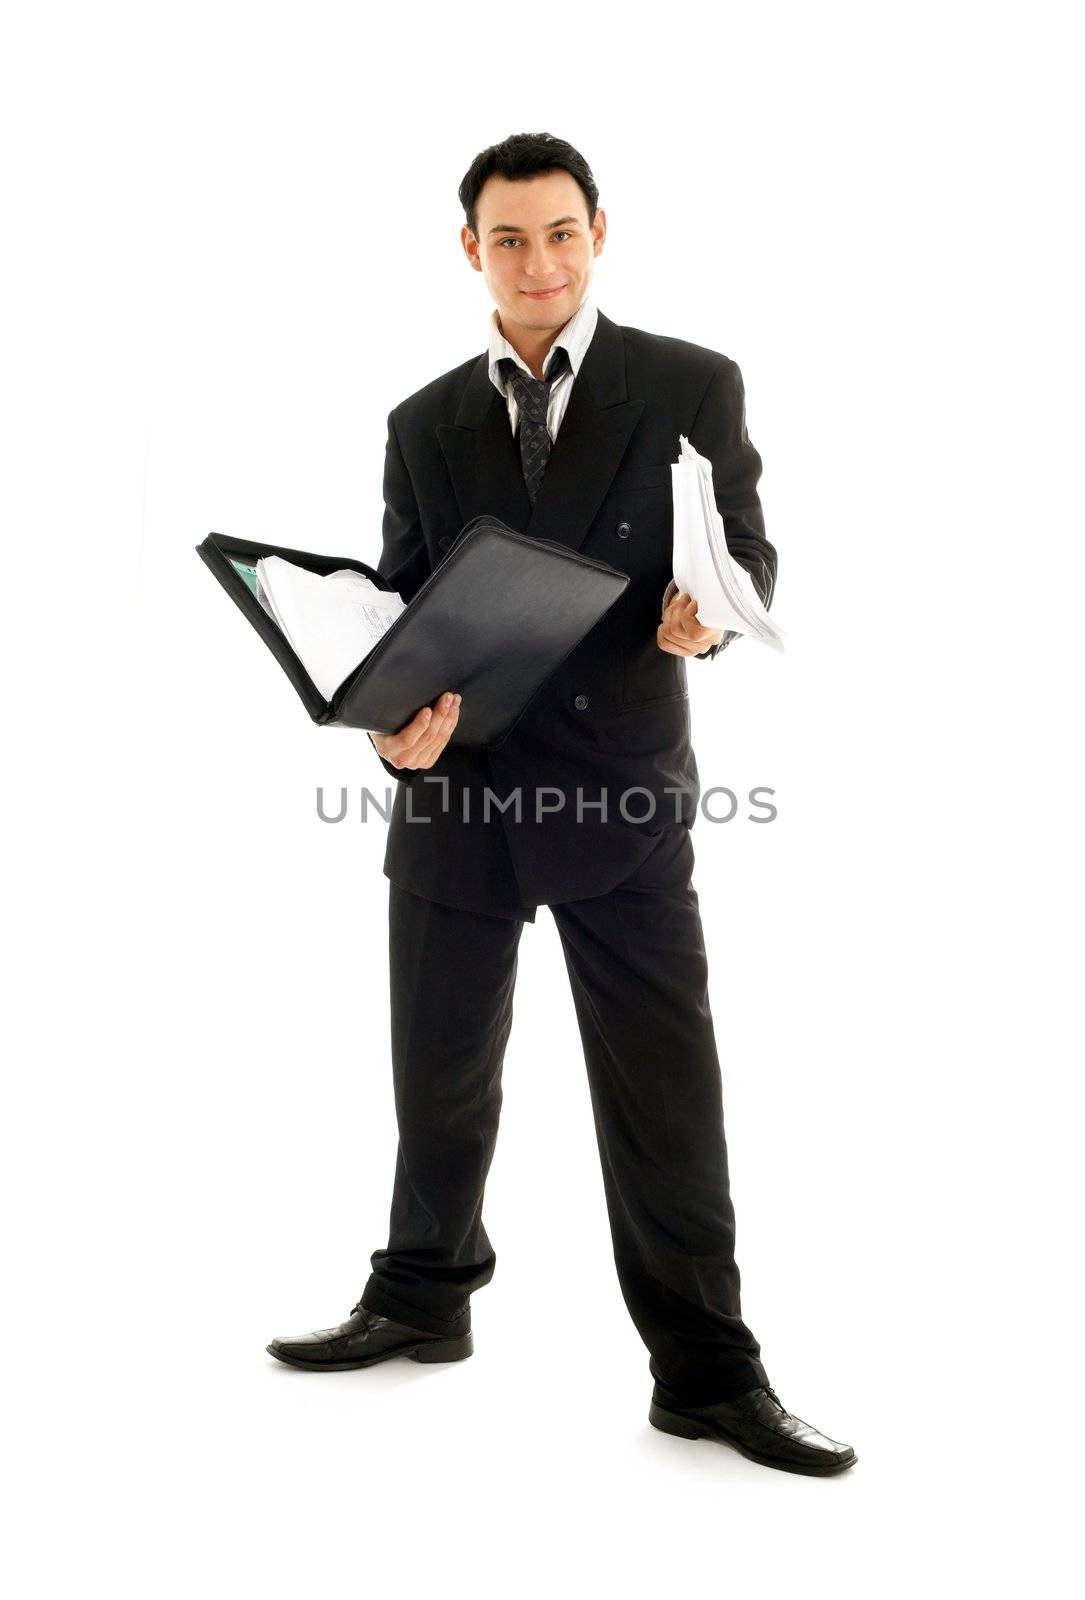 friendly businessman with folder over white background